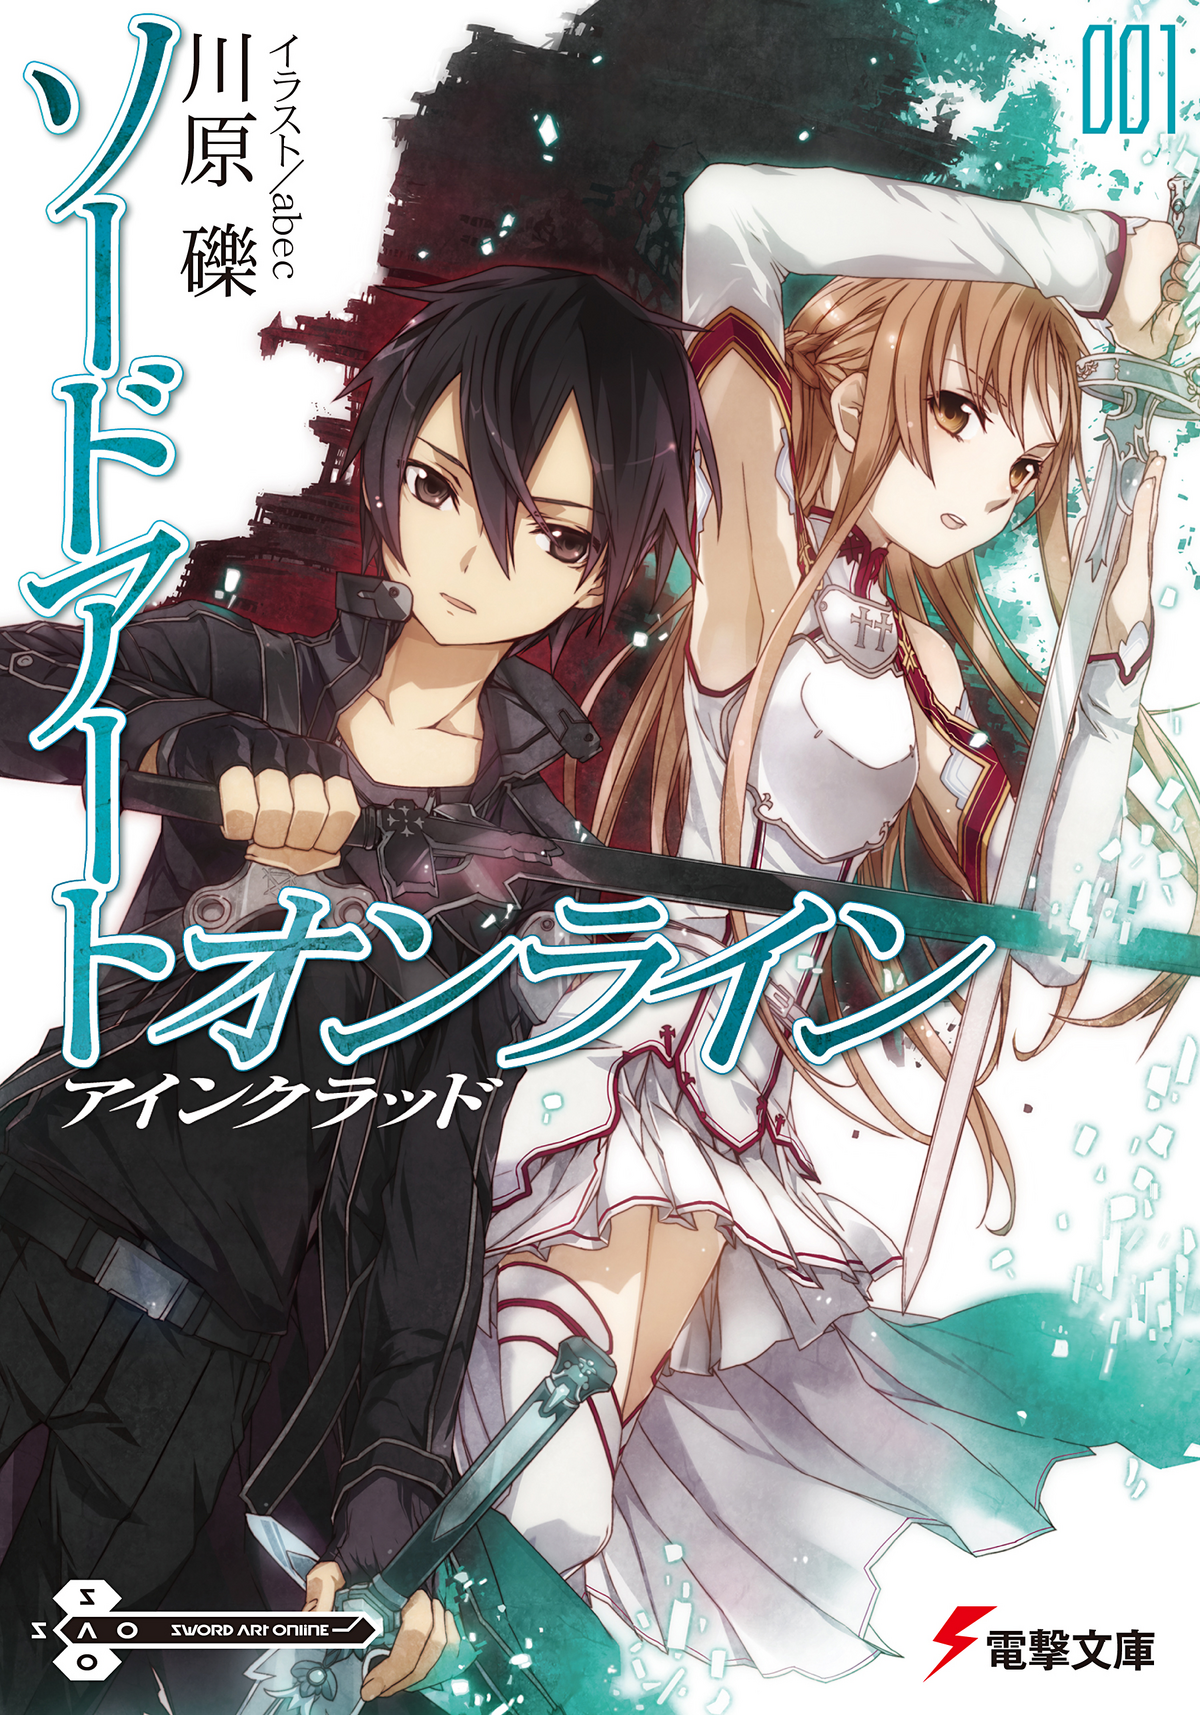 Read Killing Bites Chapter 3 in English Online